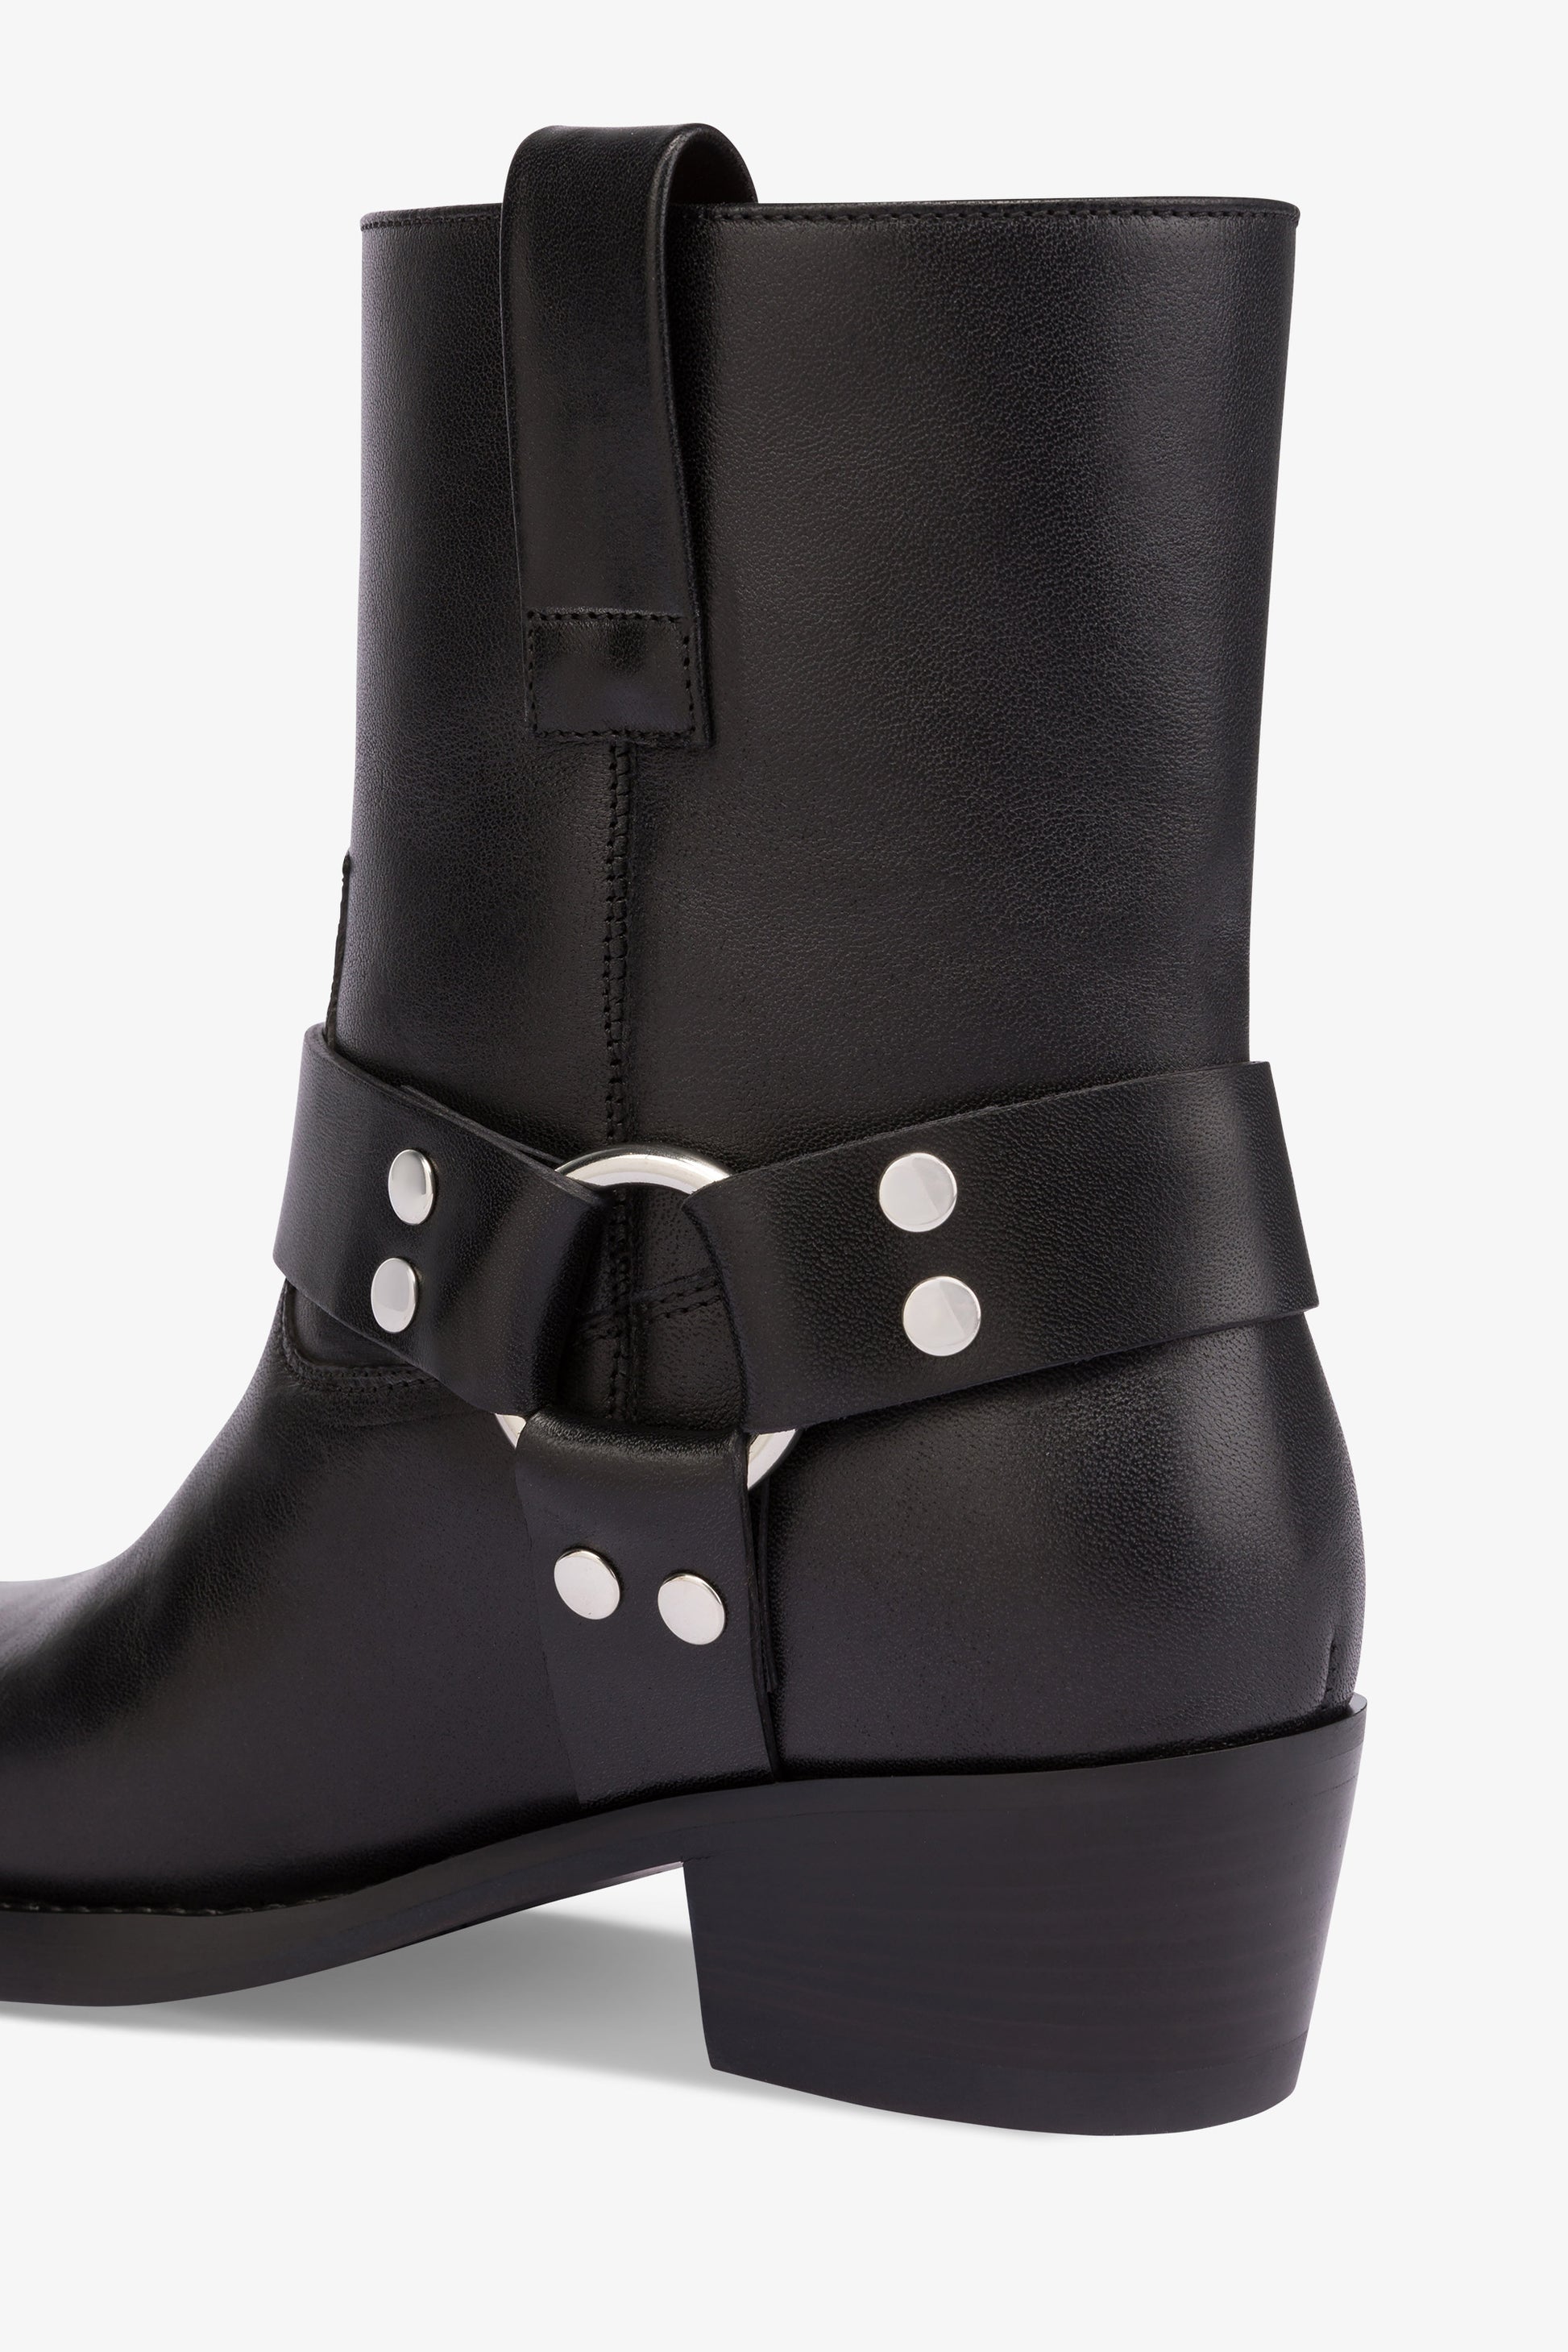 Square-toe ankle boots in smooth black leather